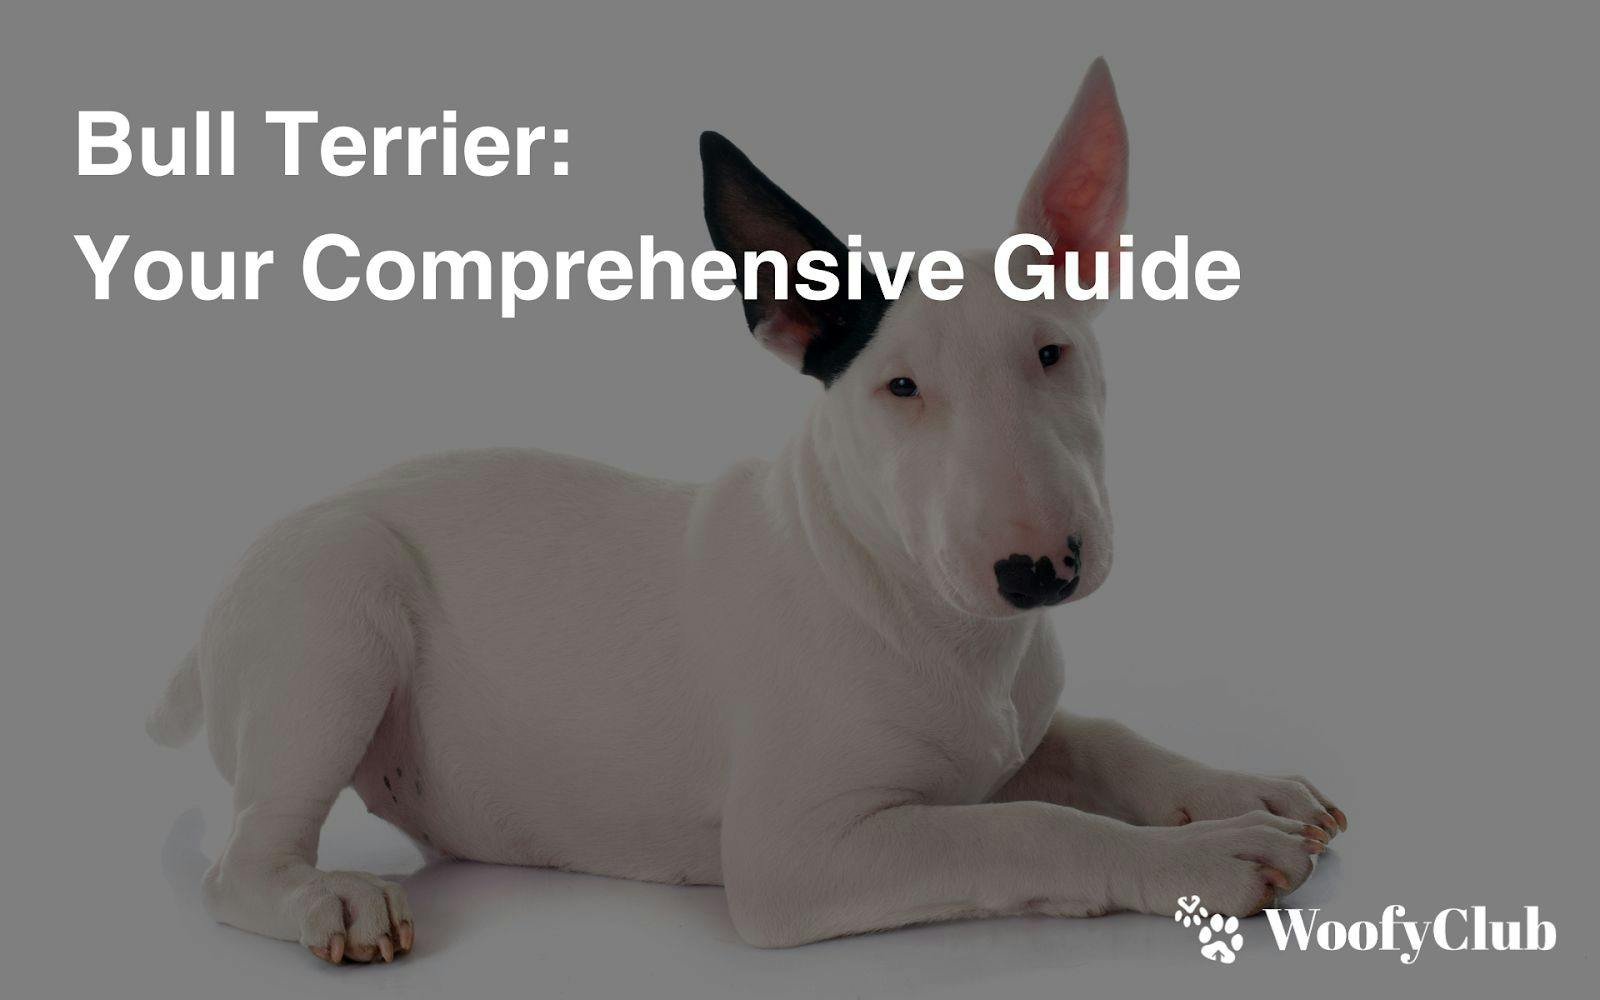 Bull Terrier: Your Comprehensive Guide